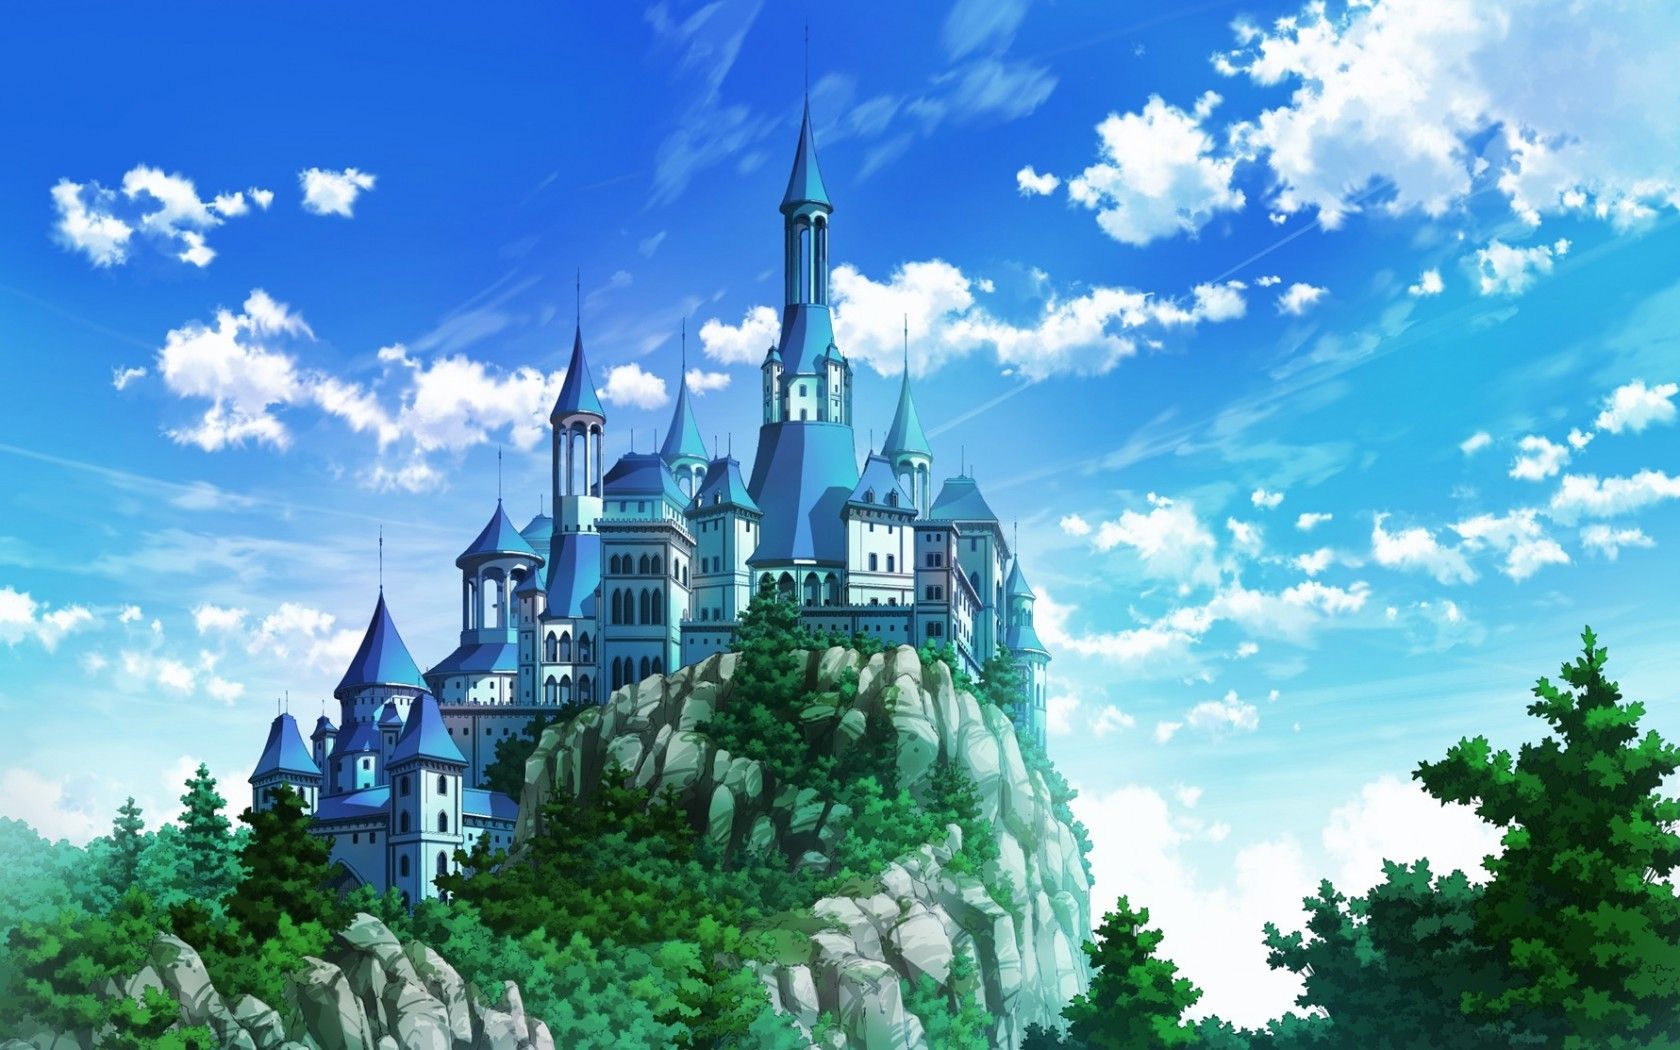 Download 1680x1050 Anime Landscape, Castle, Clouds, Trees Wallpaper for MacBook Pro 15 inch